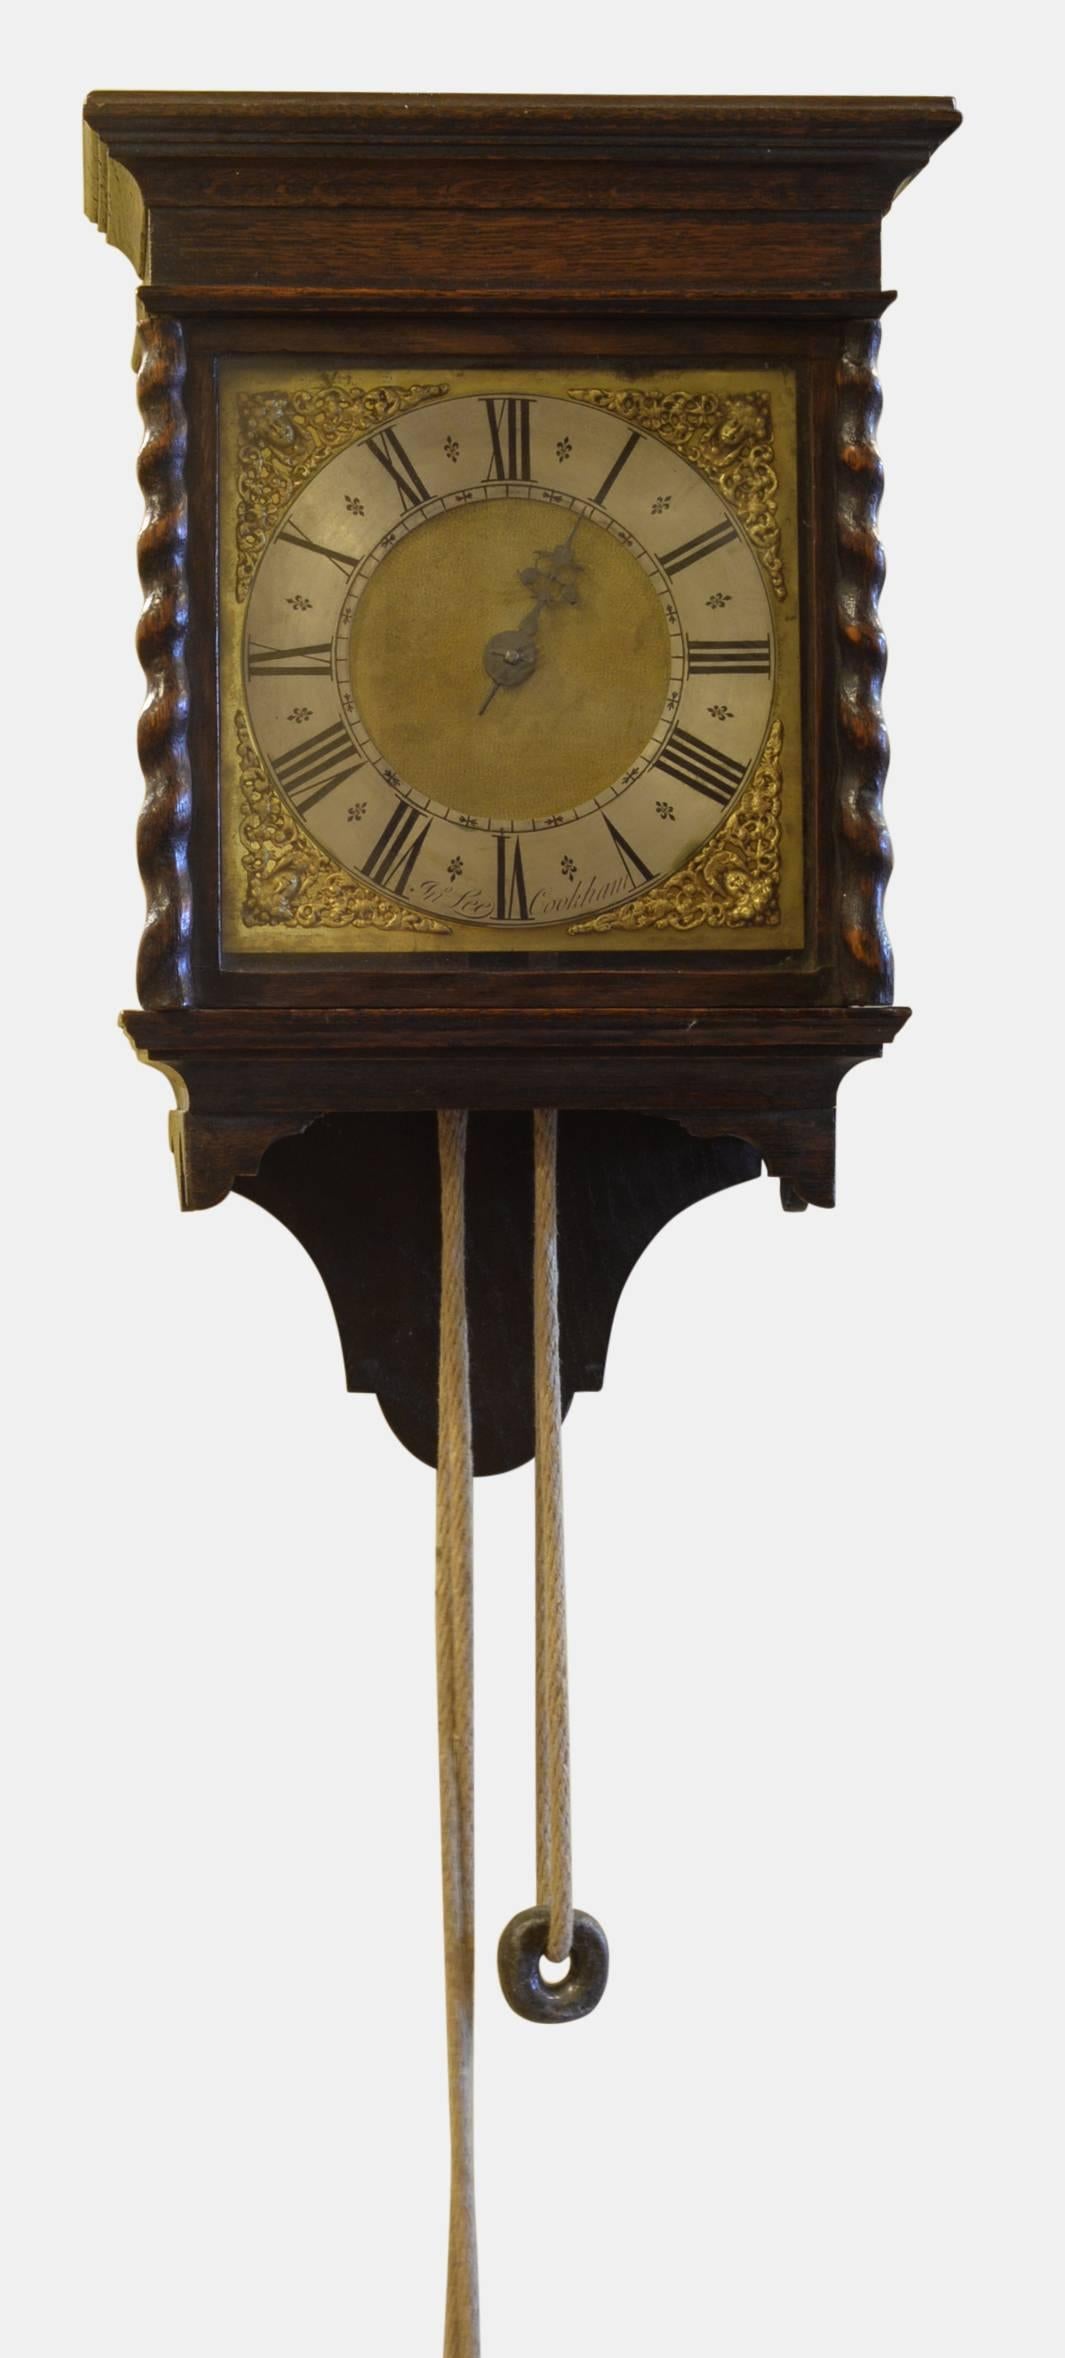 An early 18th century 'Stirrup & Spike' birdcage movement wall clock. Mounted in a later hooded wall clock case.

Signed by John Lee of Cookham, 

circa 1770.

Measures: 48 cm (18.9